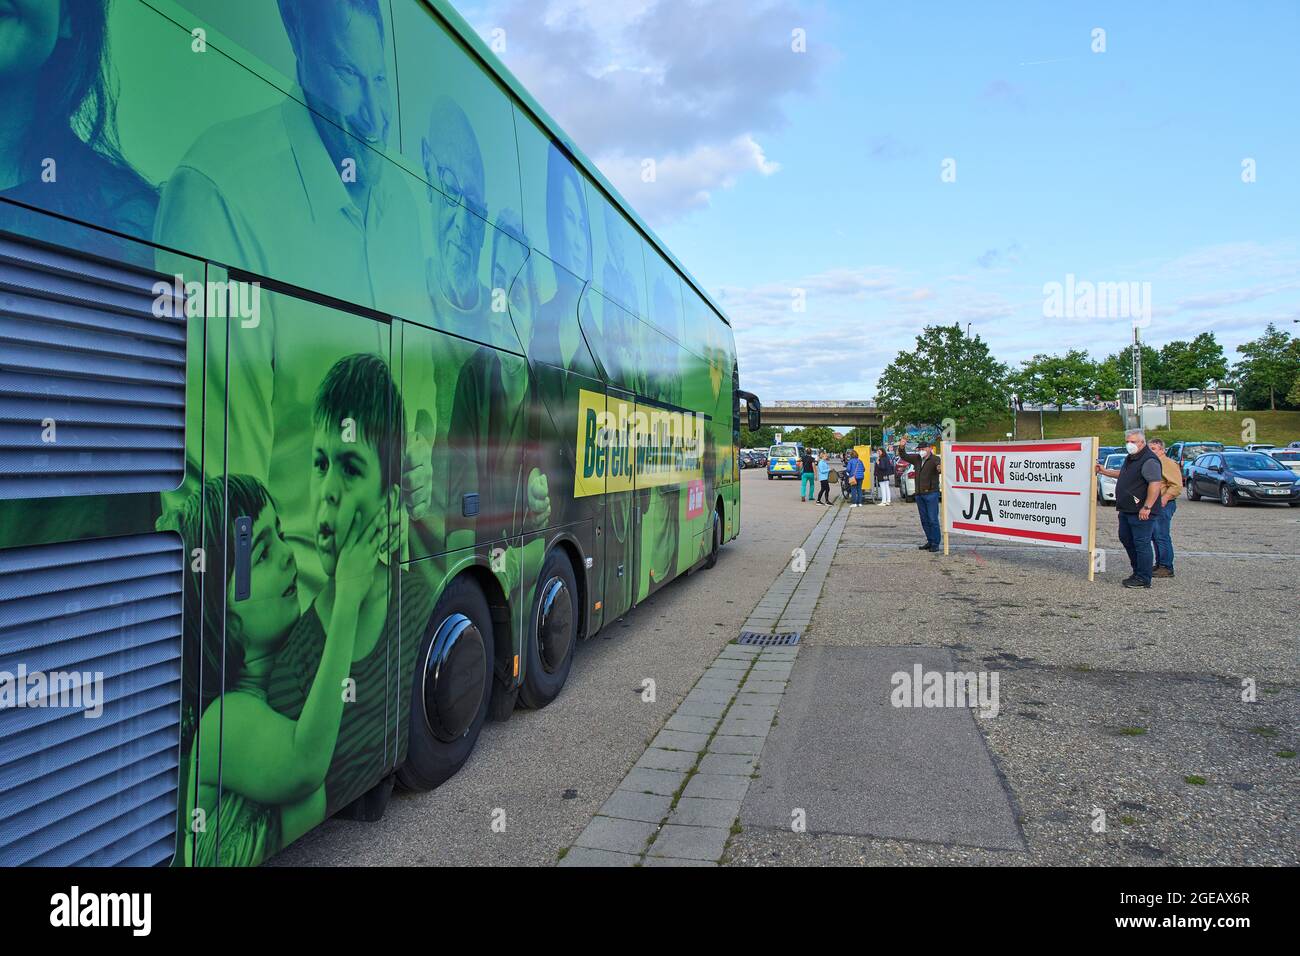 The bus of chancellor candidate and federal chairwoman of Bündnis 90 / Die Grünen  Annalena Baerbock at an election event of the parliamentary group on August 18, 2021 in Regensburg, Germany. © Peter Schatz / Alamy Live News Stock Photo